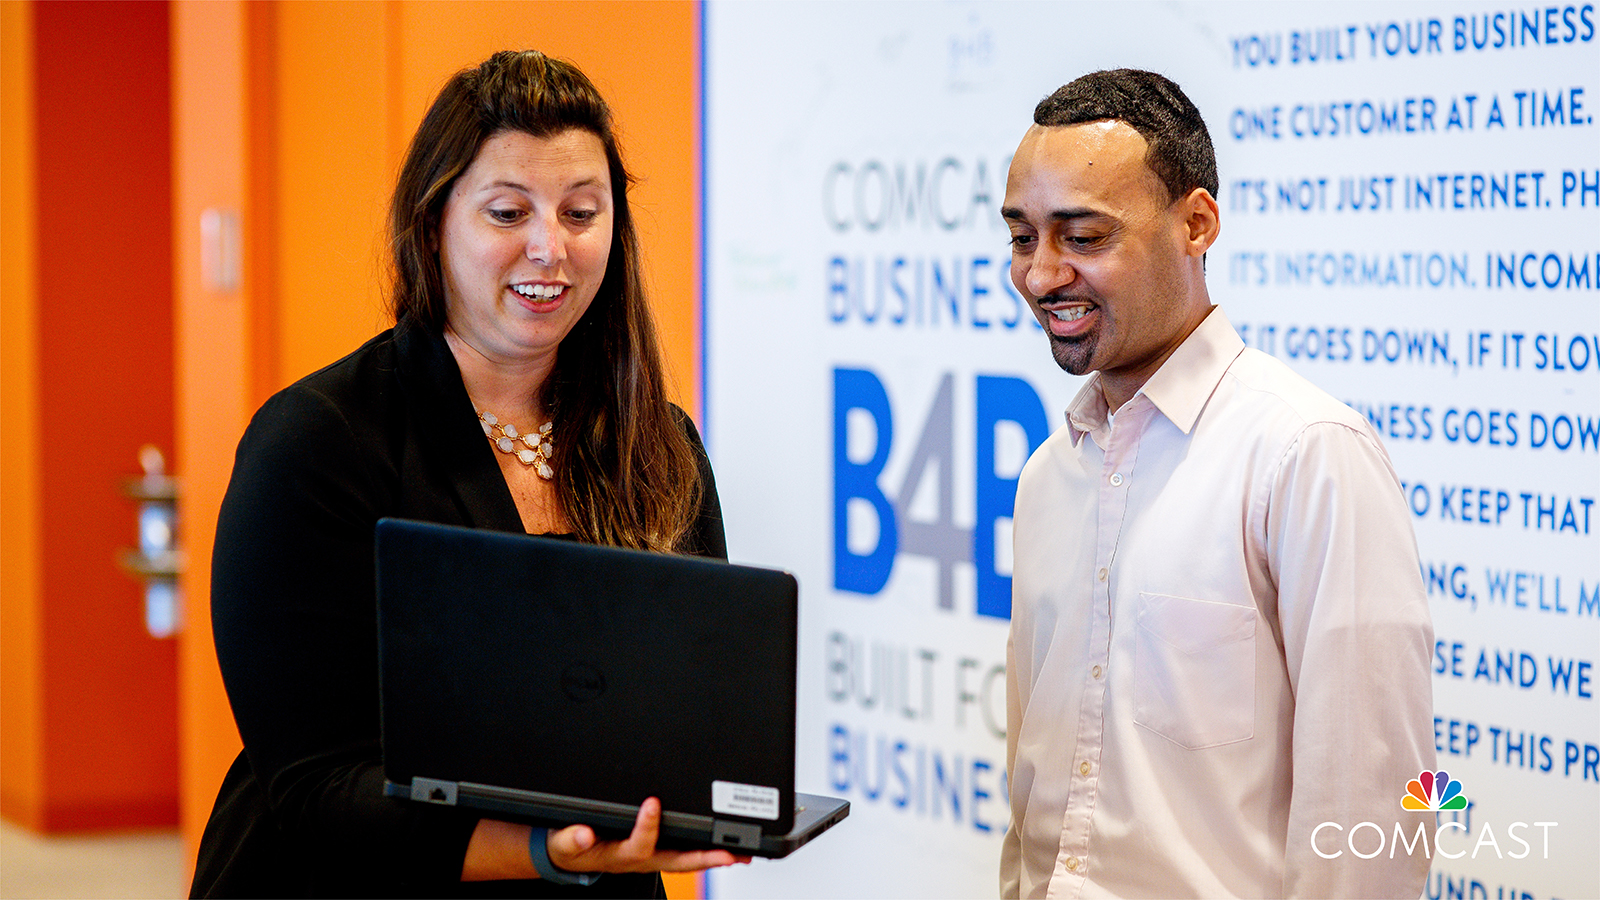 Woman showing a man something on her laptop as they stand in front of Comcast Business logo